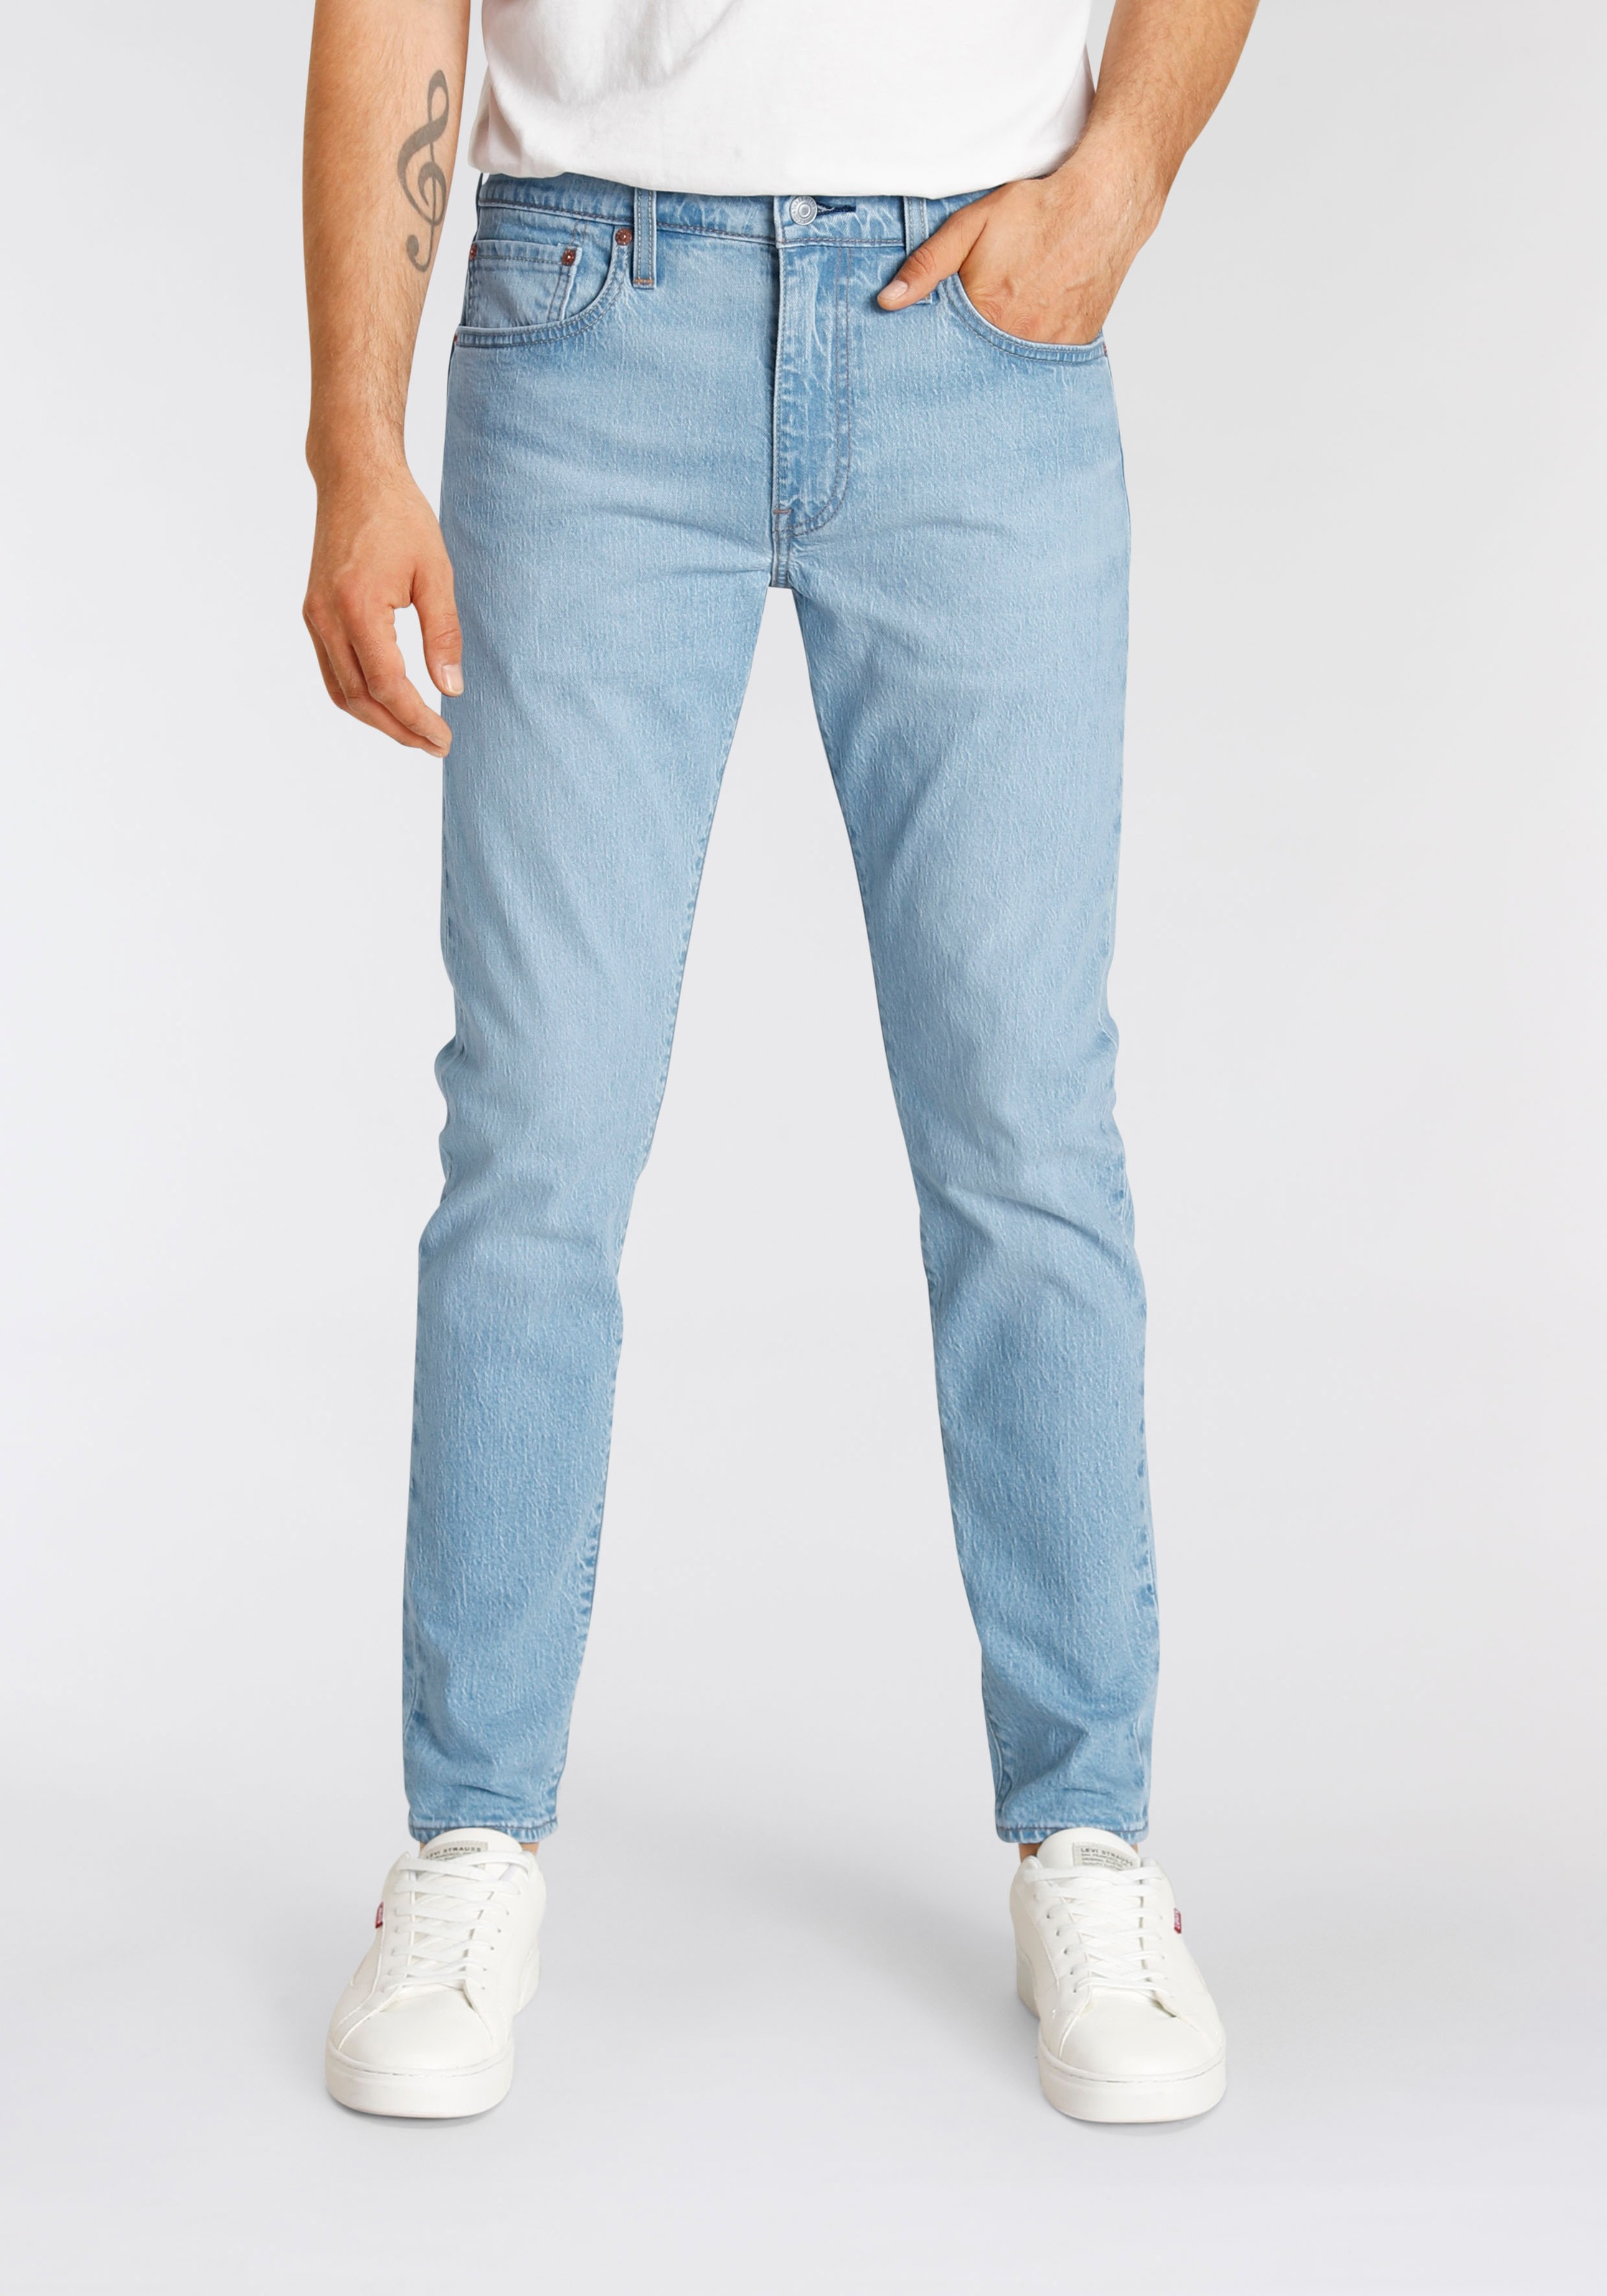 Levis Tapered-fit-Jeans "512 Slim Taper Fit"